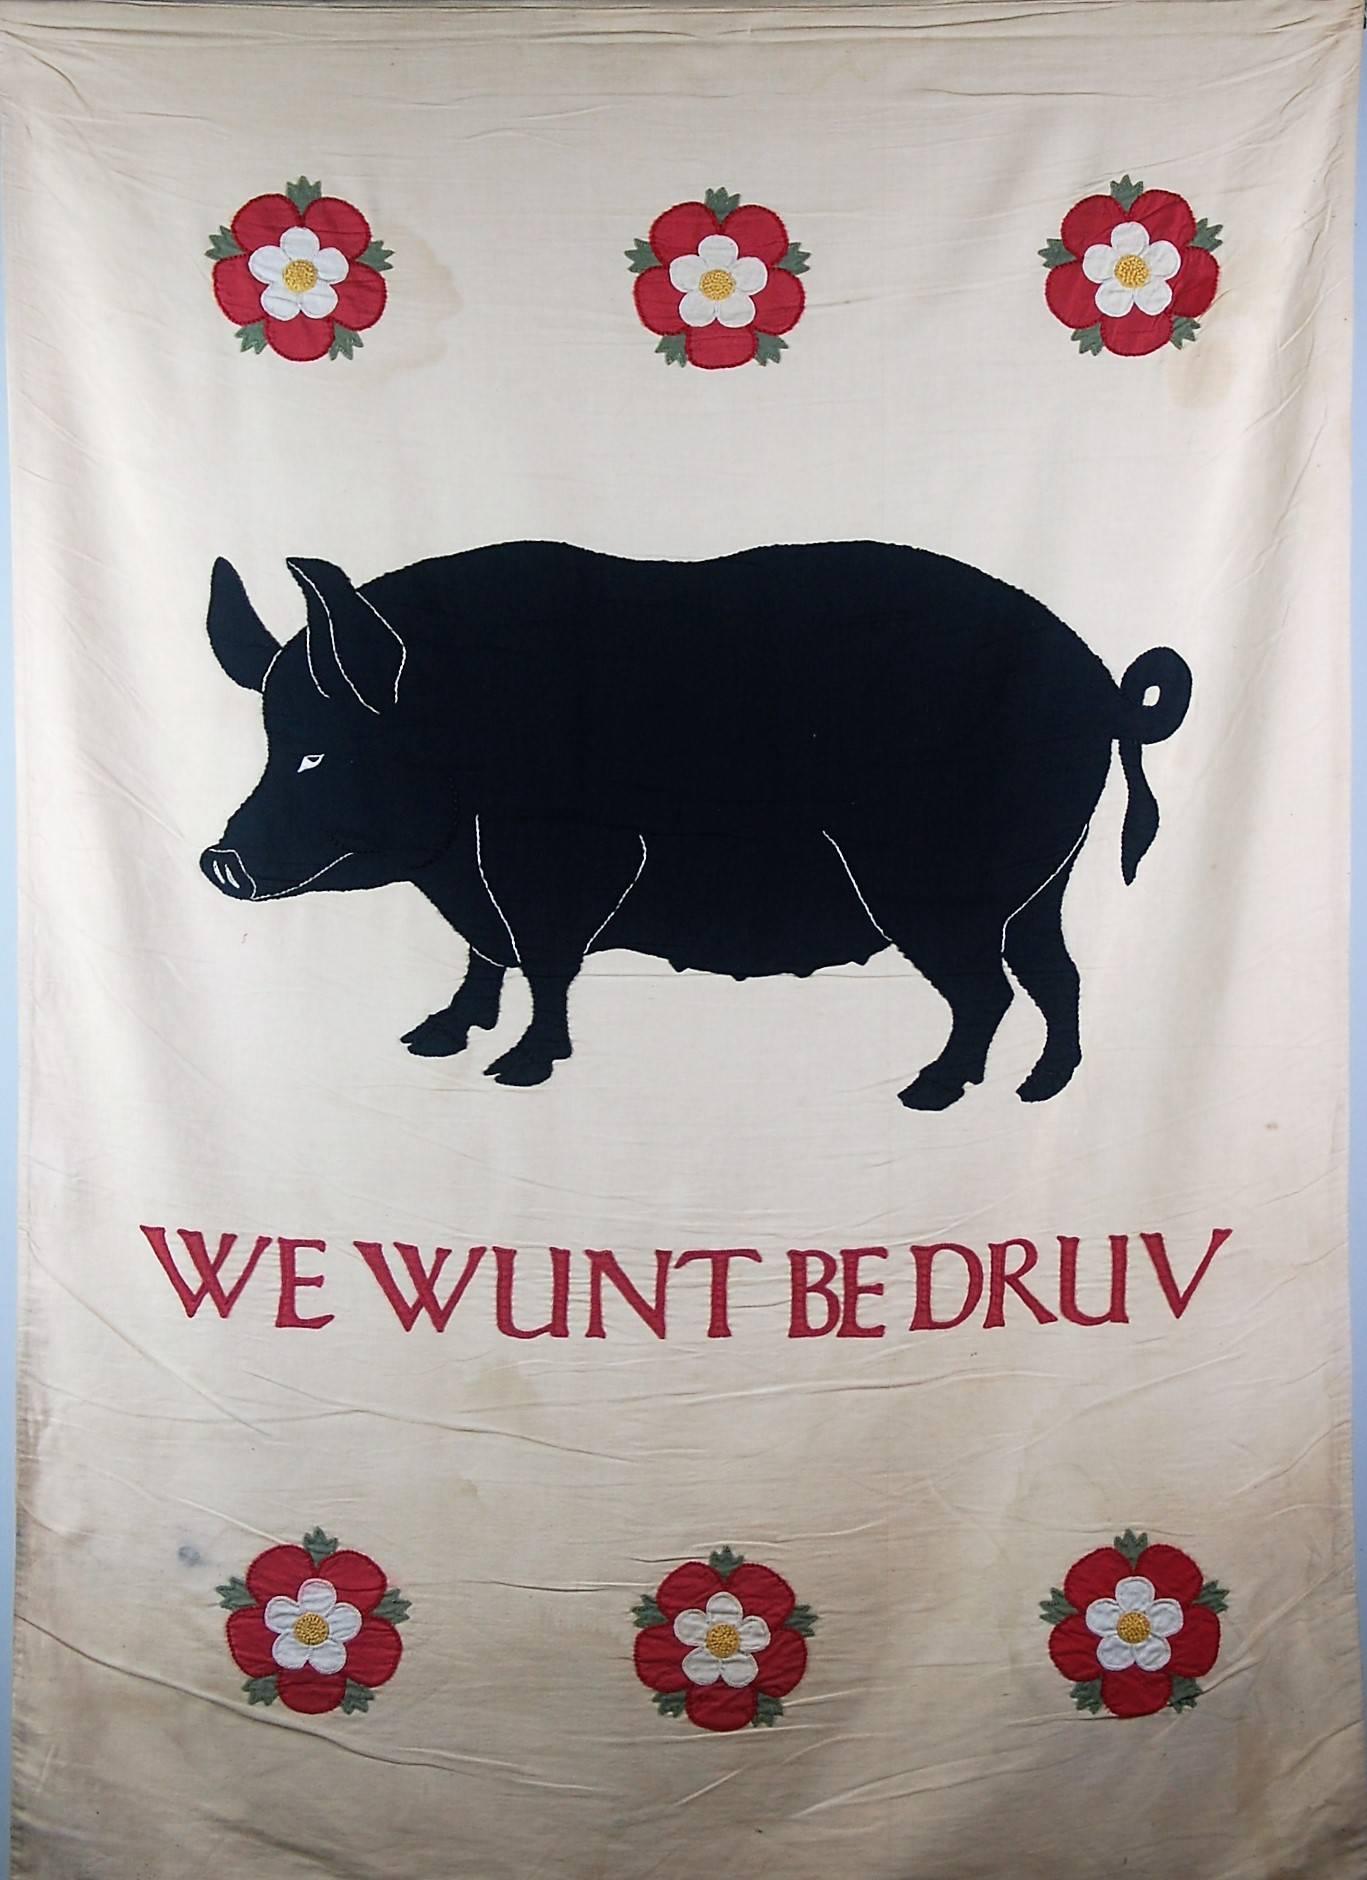 Wonderful large applique processional banner depicting a Sussex pig and six roses, with the phrase 